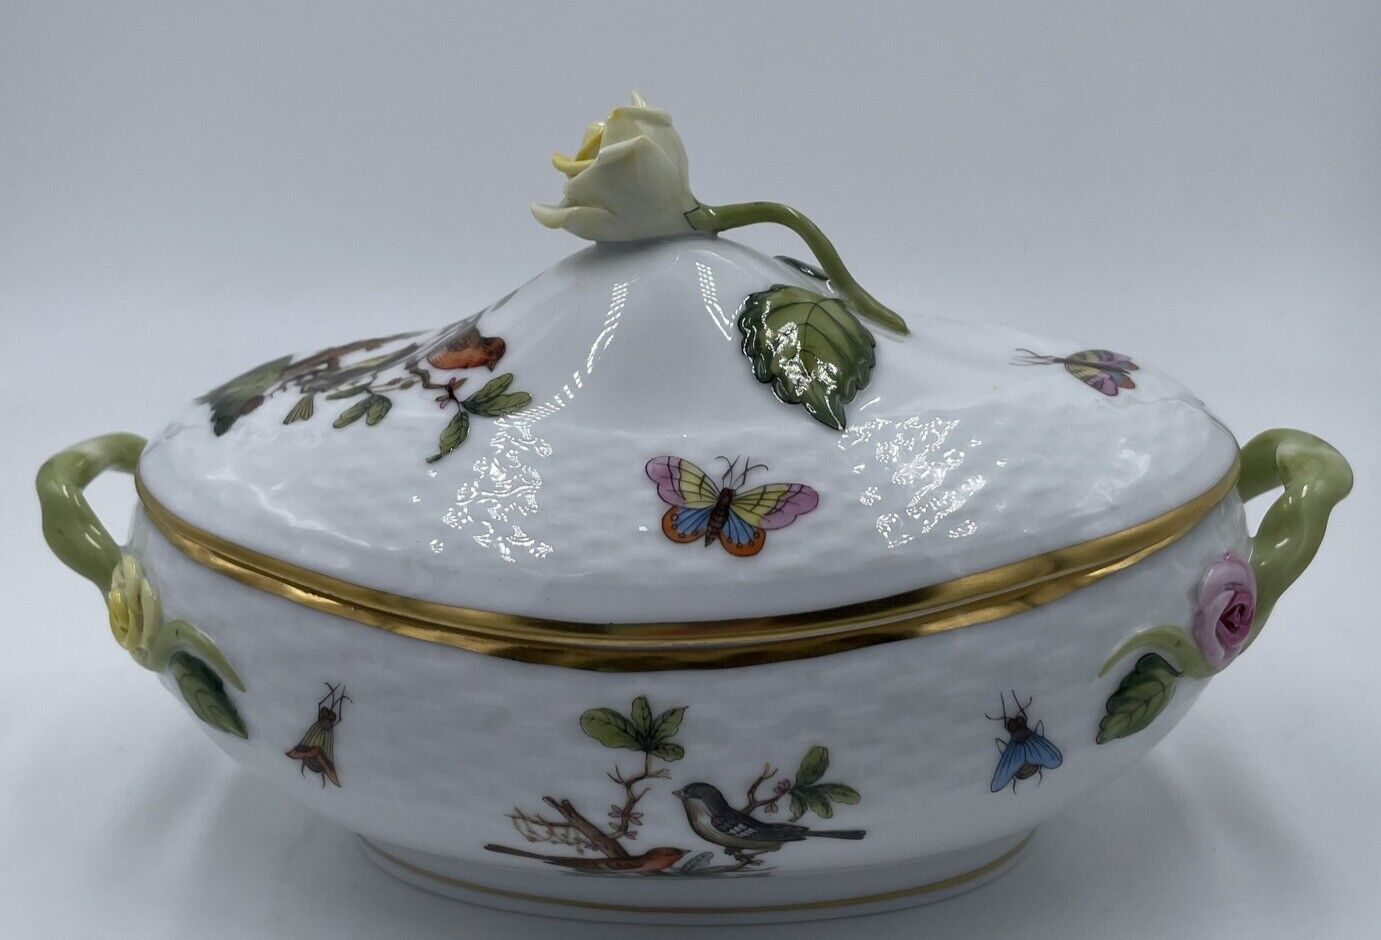 Herend Hungary Rothschild Porcelain Covered Oval Bonbon Dish W Rose & Butterfly